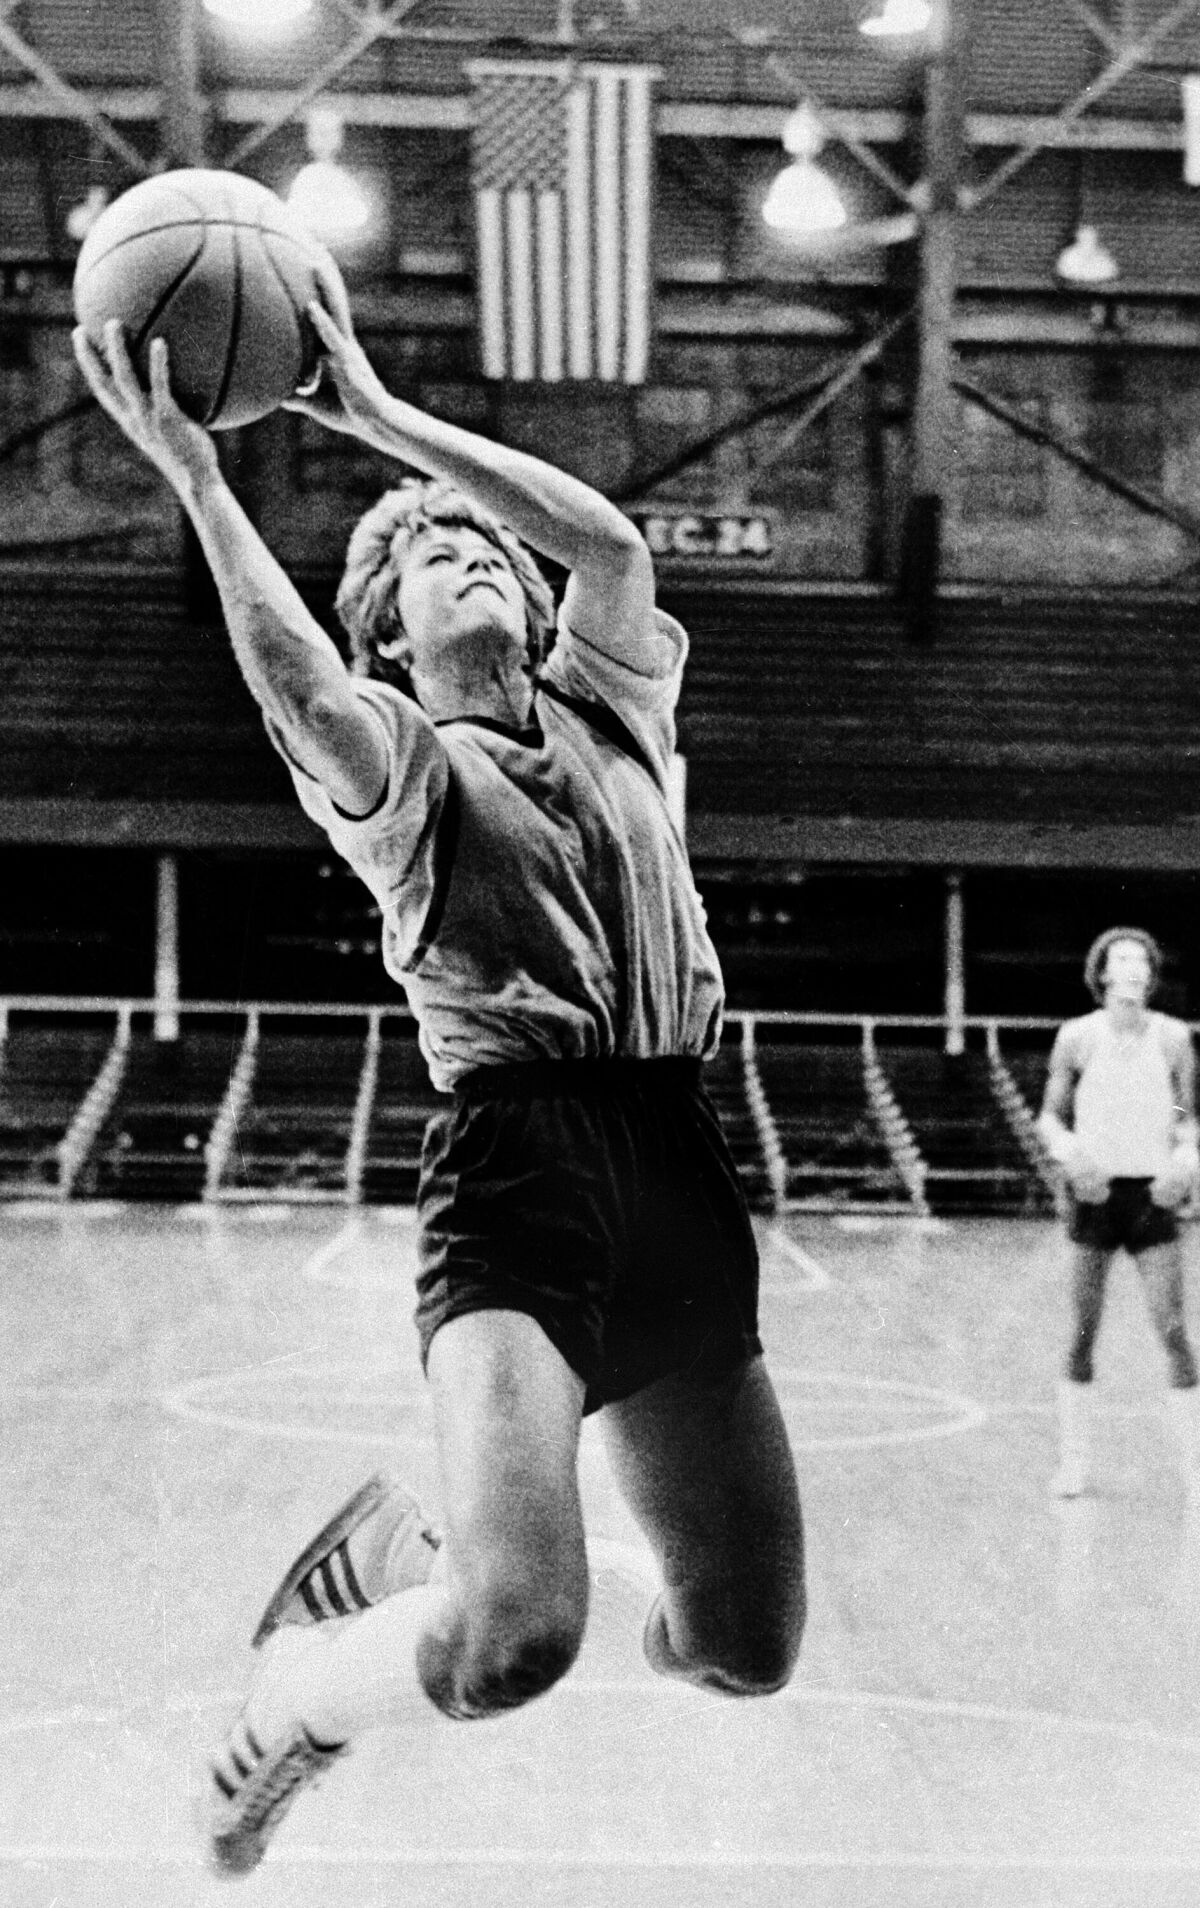 Ann Meyers Drysdale drives to the basket during practice at rookie camp for the Indiana Pacers in September 1978.